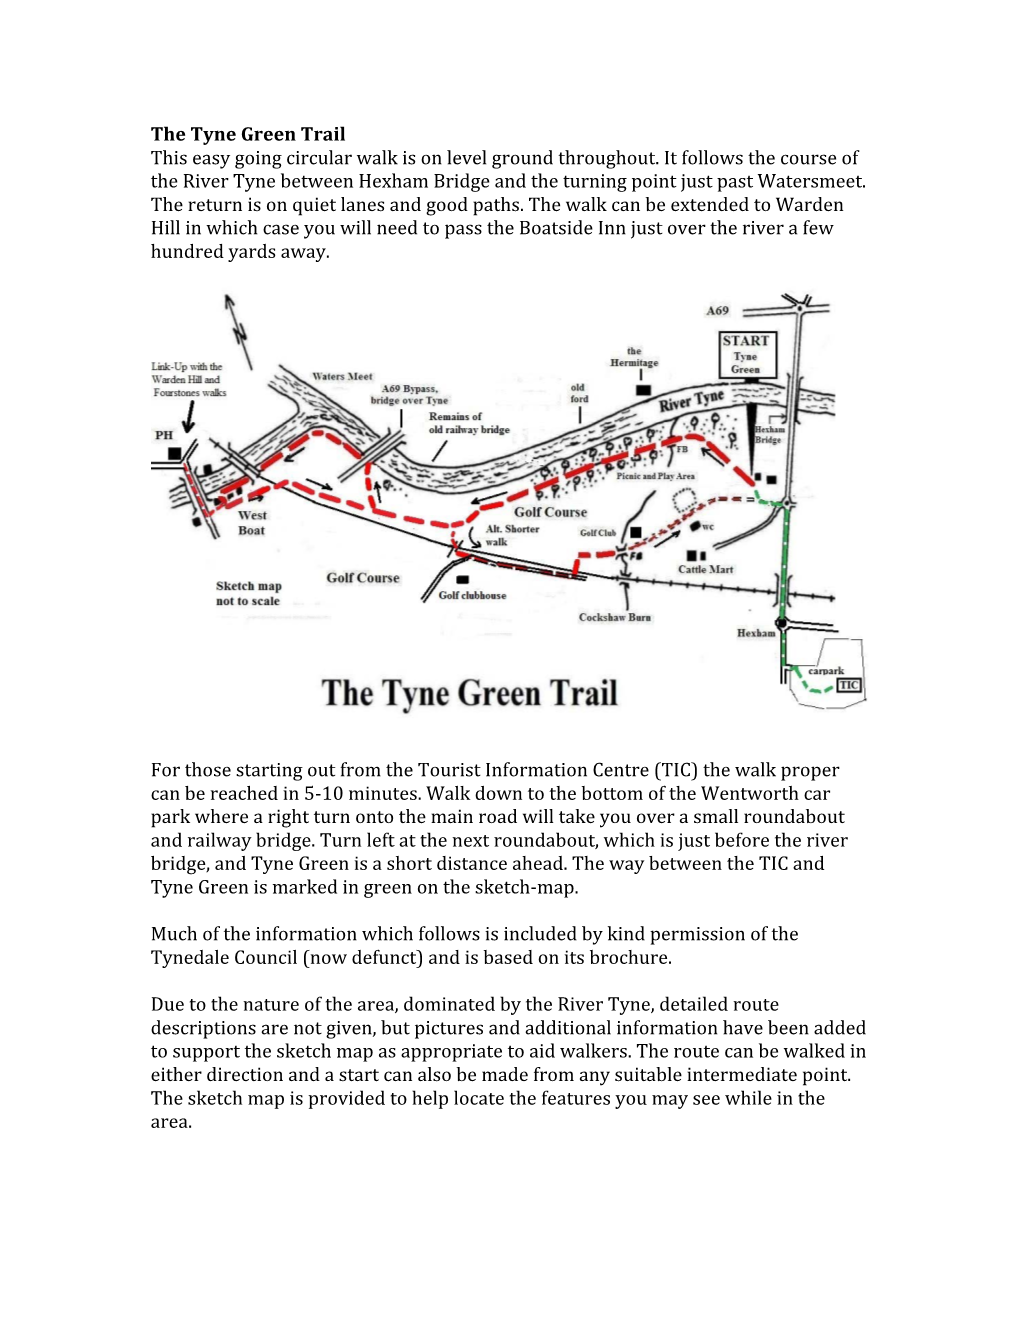 The Tyne Green Trail This Easy Going Circular Walk Is on Level Ground Throughout